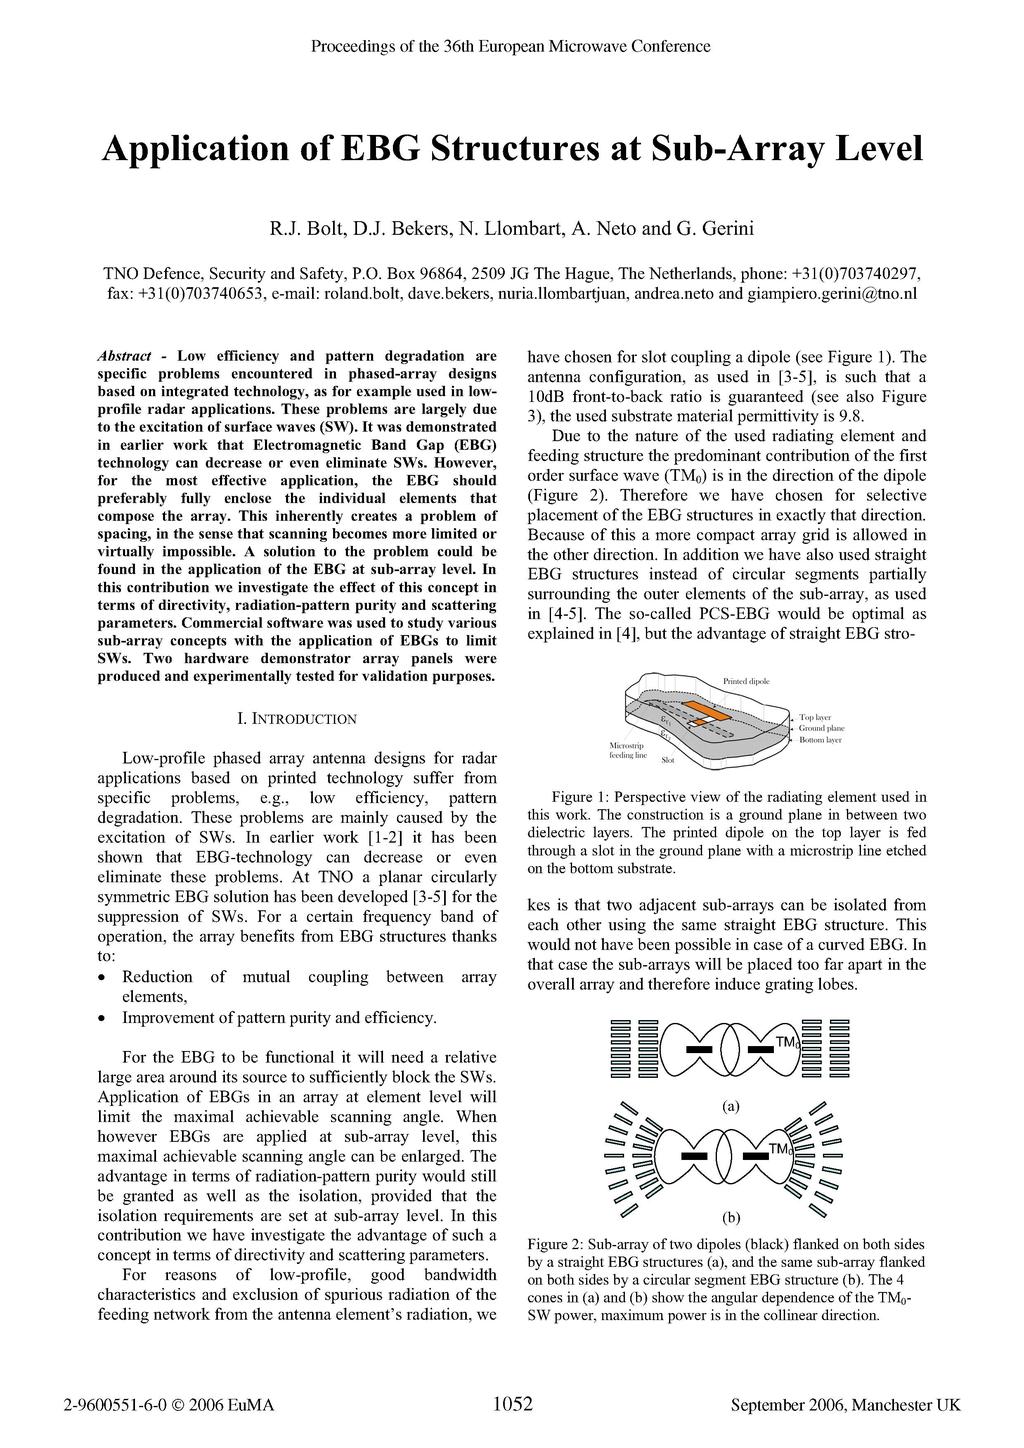 Proceedings of the 36th European Microwave Conference Application of EBG Structures at SubArray Level RJ Bolt, DJ Bekers, N Llombart, A Neto and G Gerini TNO Defence, Security and Safety, PO Box